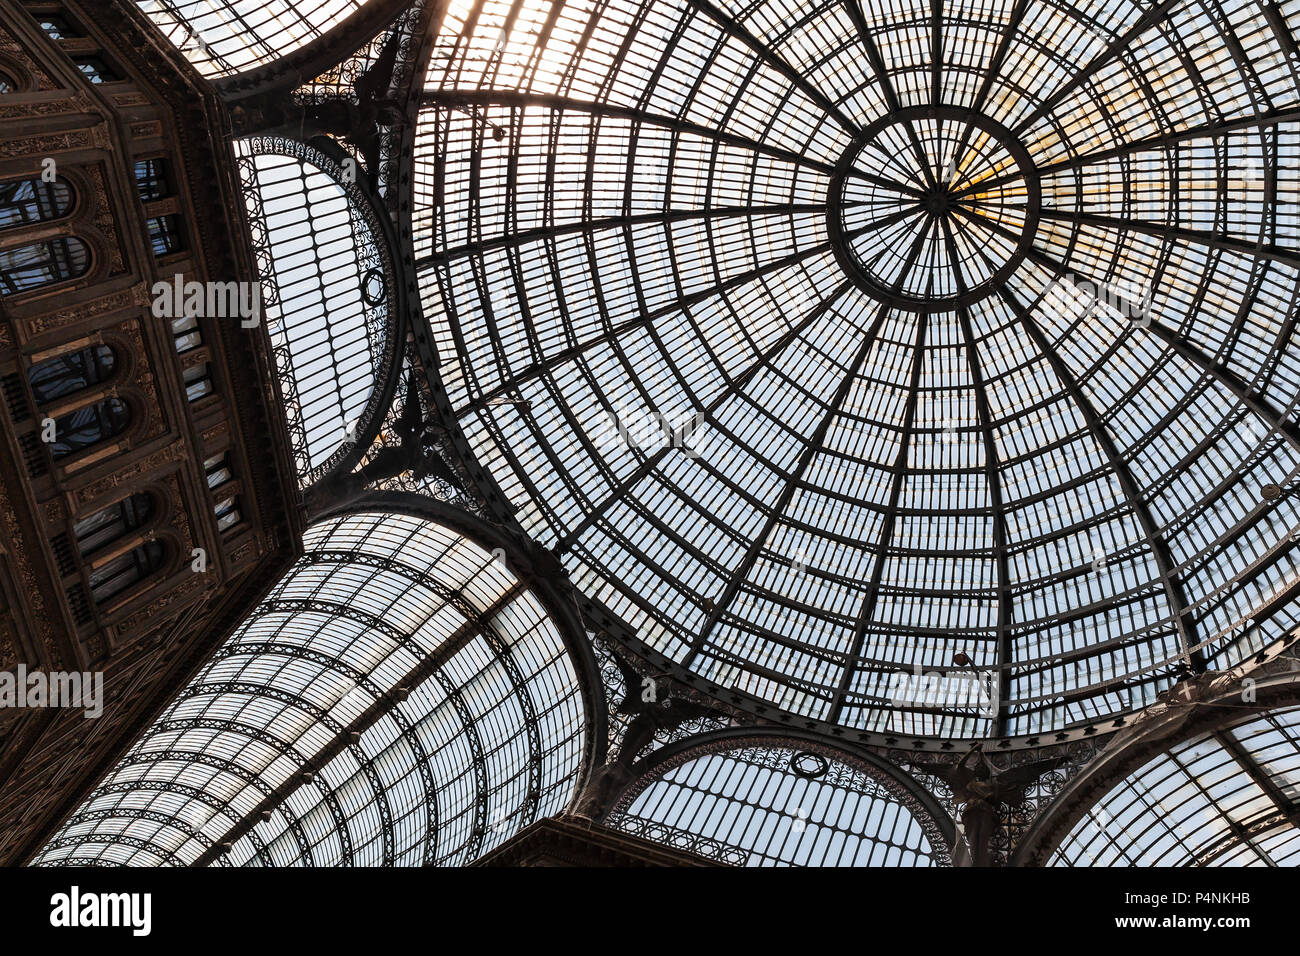 Naples, Italy - August 9, 2015: Glass roof dome of Galleria Umberto I Stock Photo